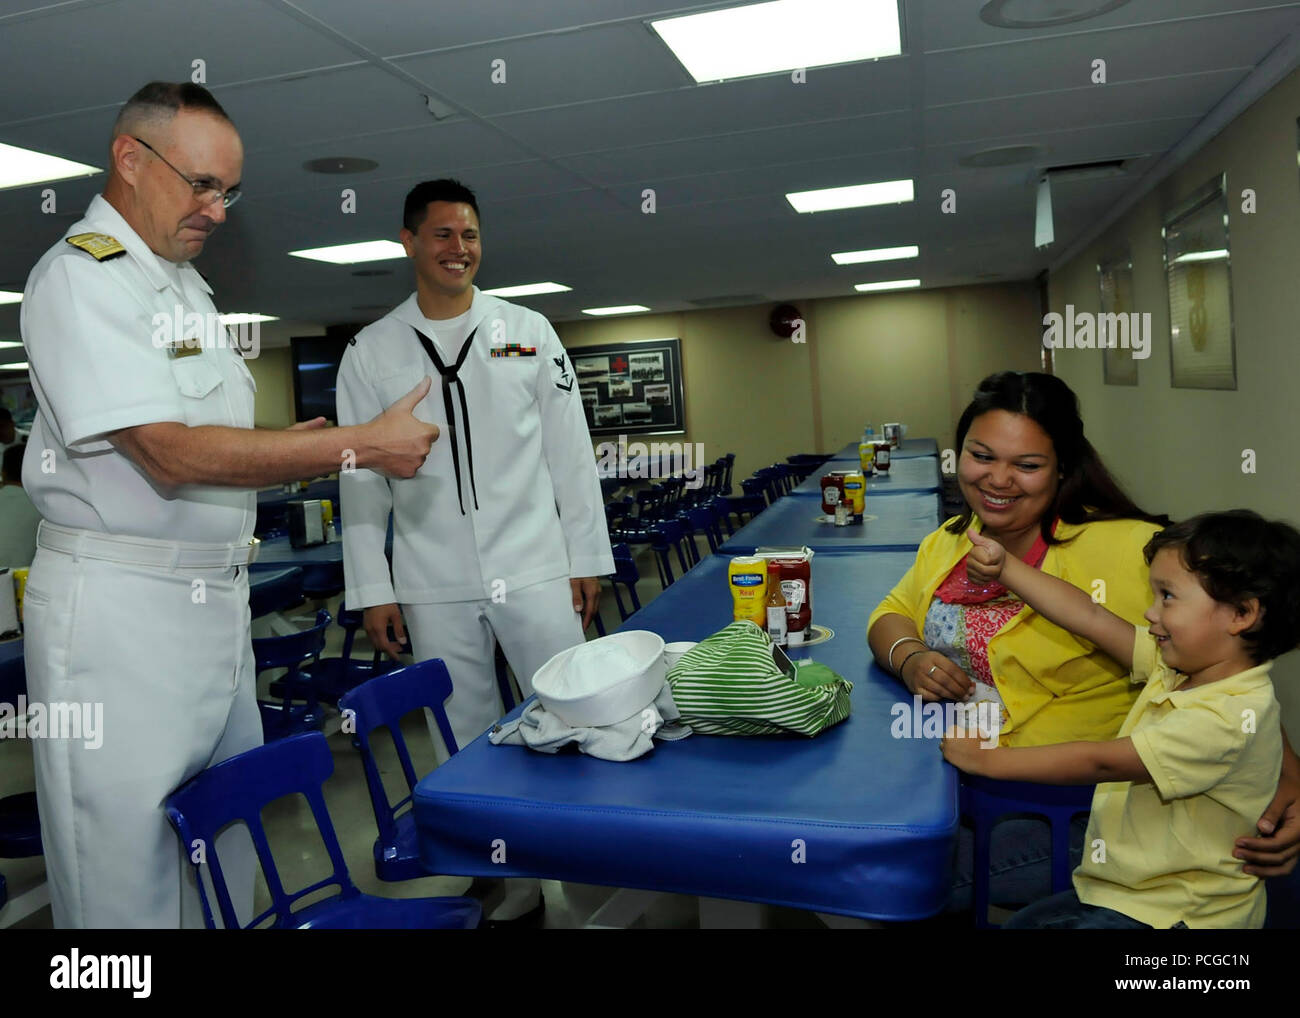 Rear Adm. C. Forrest Faison III, commander of Navy Medicine West, gives a thumbs-up to a boy and his parents in the mess decks aboard the Military Sealift Command hospital ship USNS Mercy (T-AH 19). Nearly 500 medical and support staff from Navy Medicine West are deployed aboard Mercy supporting Pacific Partnership 2012. Pacific Partnership is an annual U.S. Pacific Fleet humanitarian and civic action exercise designed to work with and through host nations to build partnerships and a collective ability to respond to natural disasters. Stock Photo